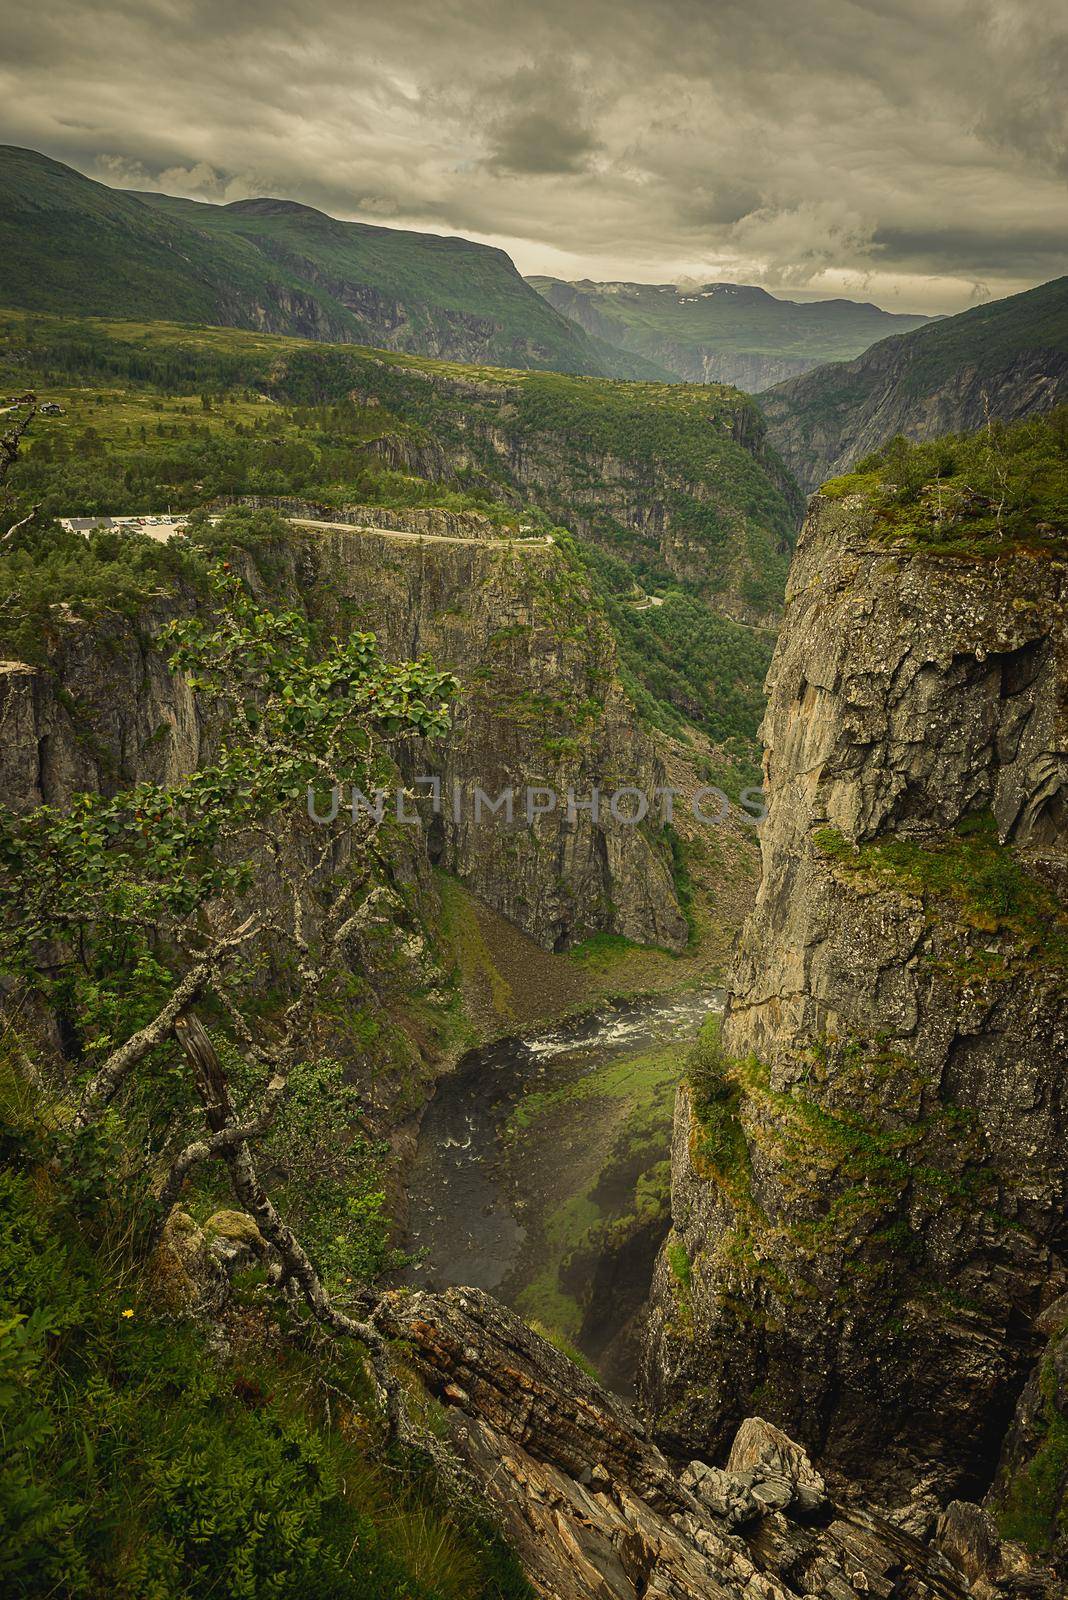 Vøringsfossen - Vøring Falls -  is located in Eidfjord, Hardanger, at the top of Måbødalen. The falls is one of the most popular and visited attraction in Norway. It is possible to see the falls from above, or even after a short hiking it is possible to witness the falls from below. Either way, it is one of the most spectacular experience one will have visiting Norway.